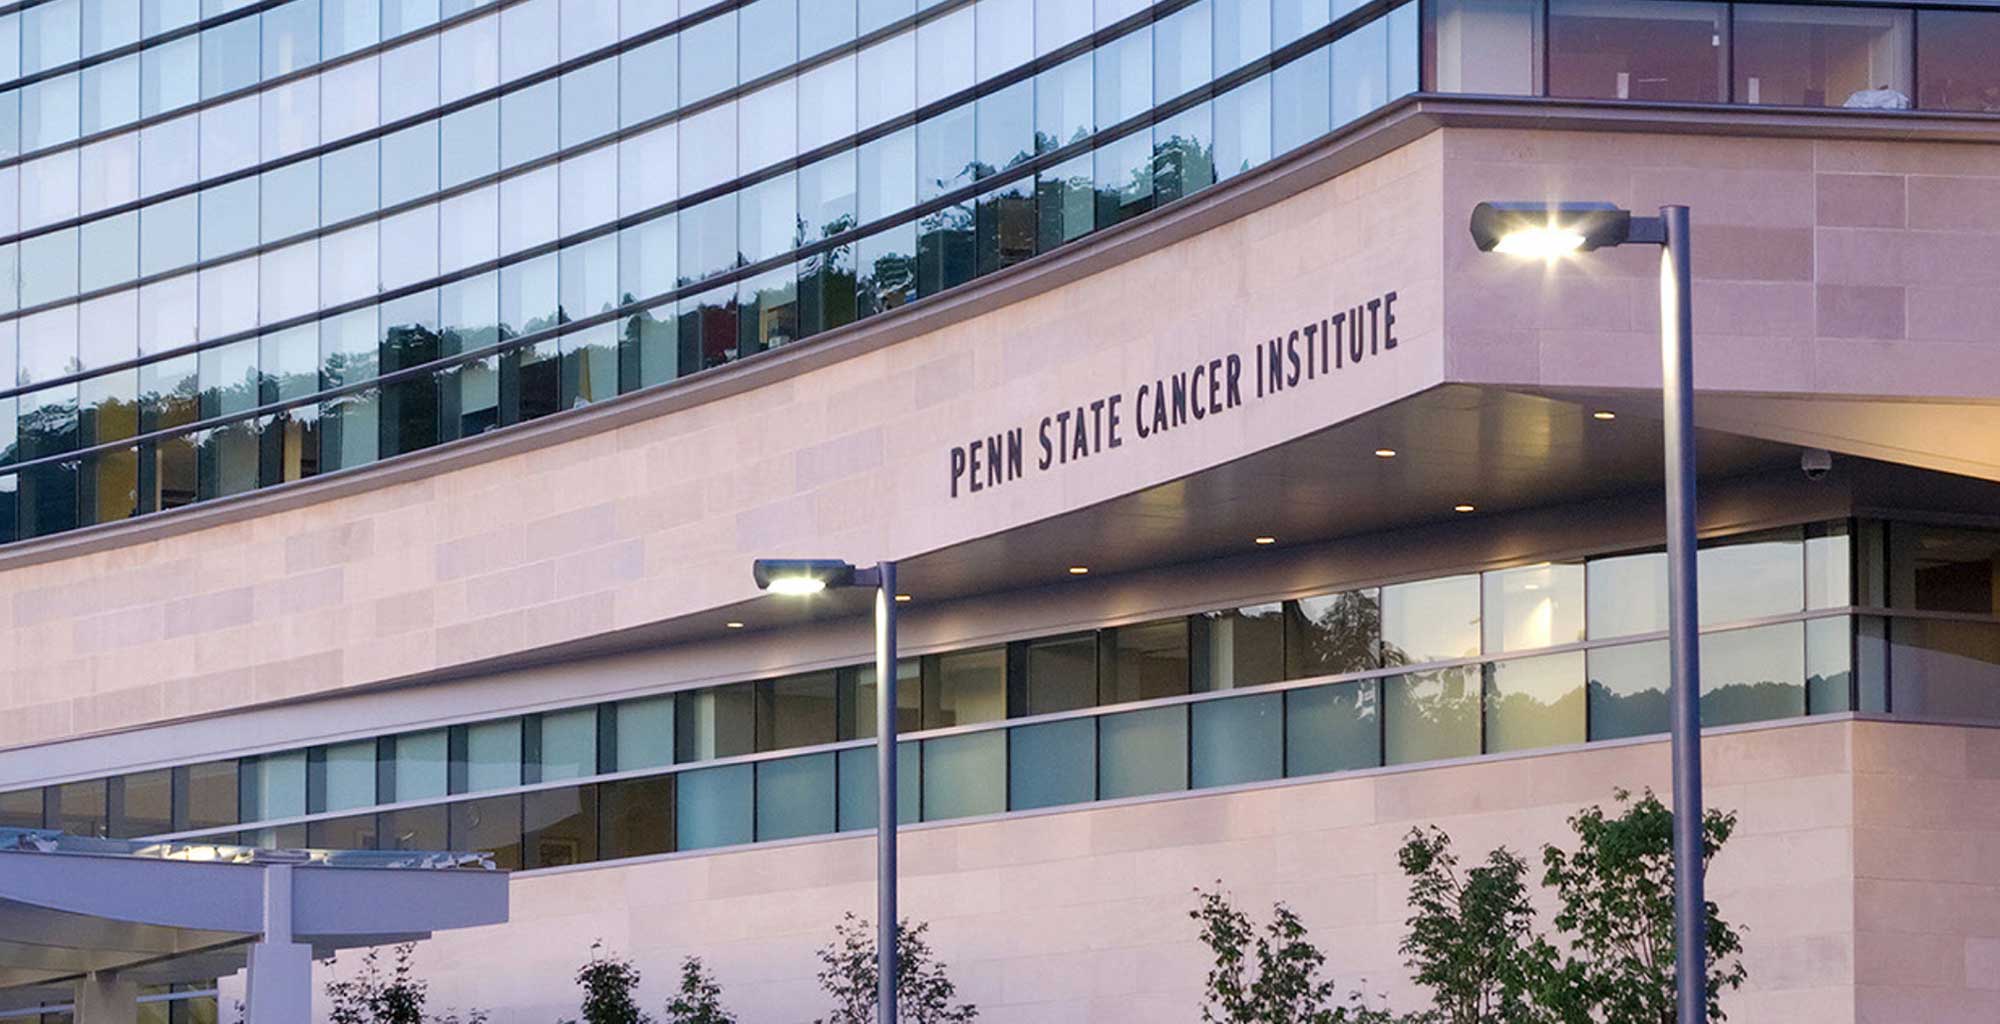 The Penn State Cancer Institute building is seen in the evening. A road leads up to it and a wall of glass windows is visible above the entrance.